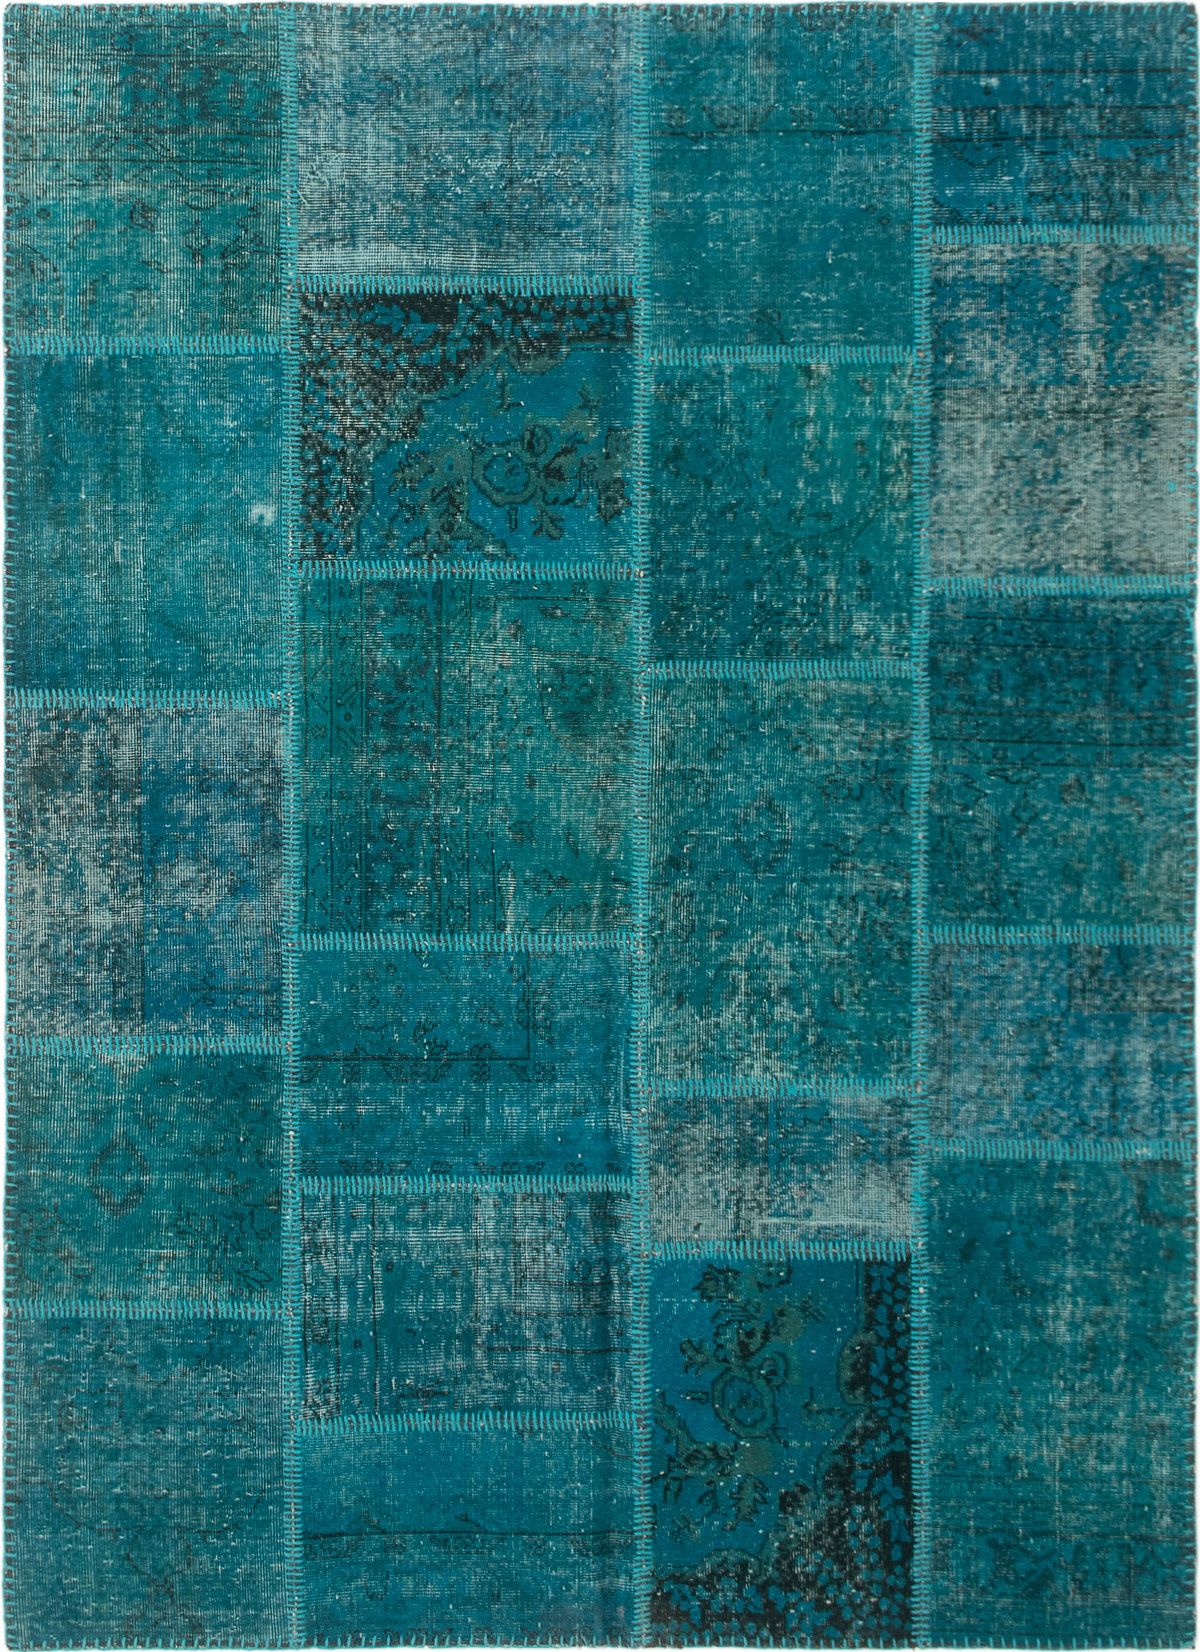 Hand-knotted Color Transition Patch Turquoise Wool Rug 5'7" x 7'9"  Size: 5'7" x 7'9"  